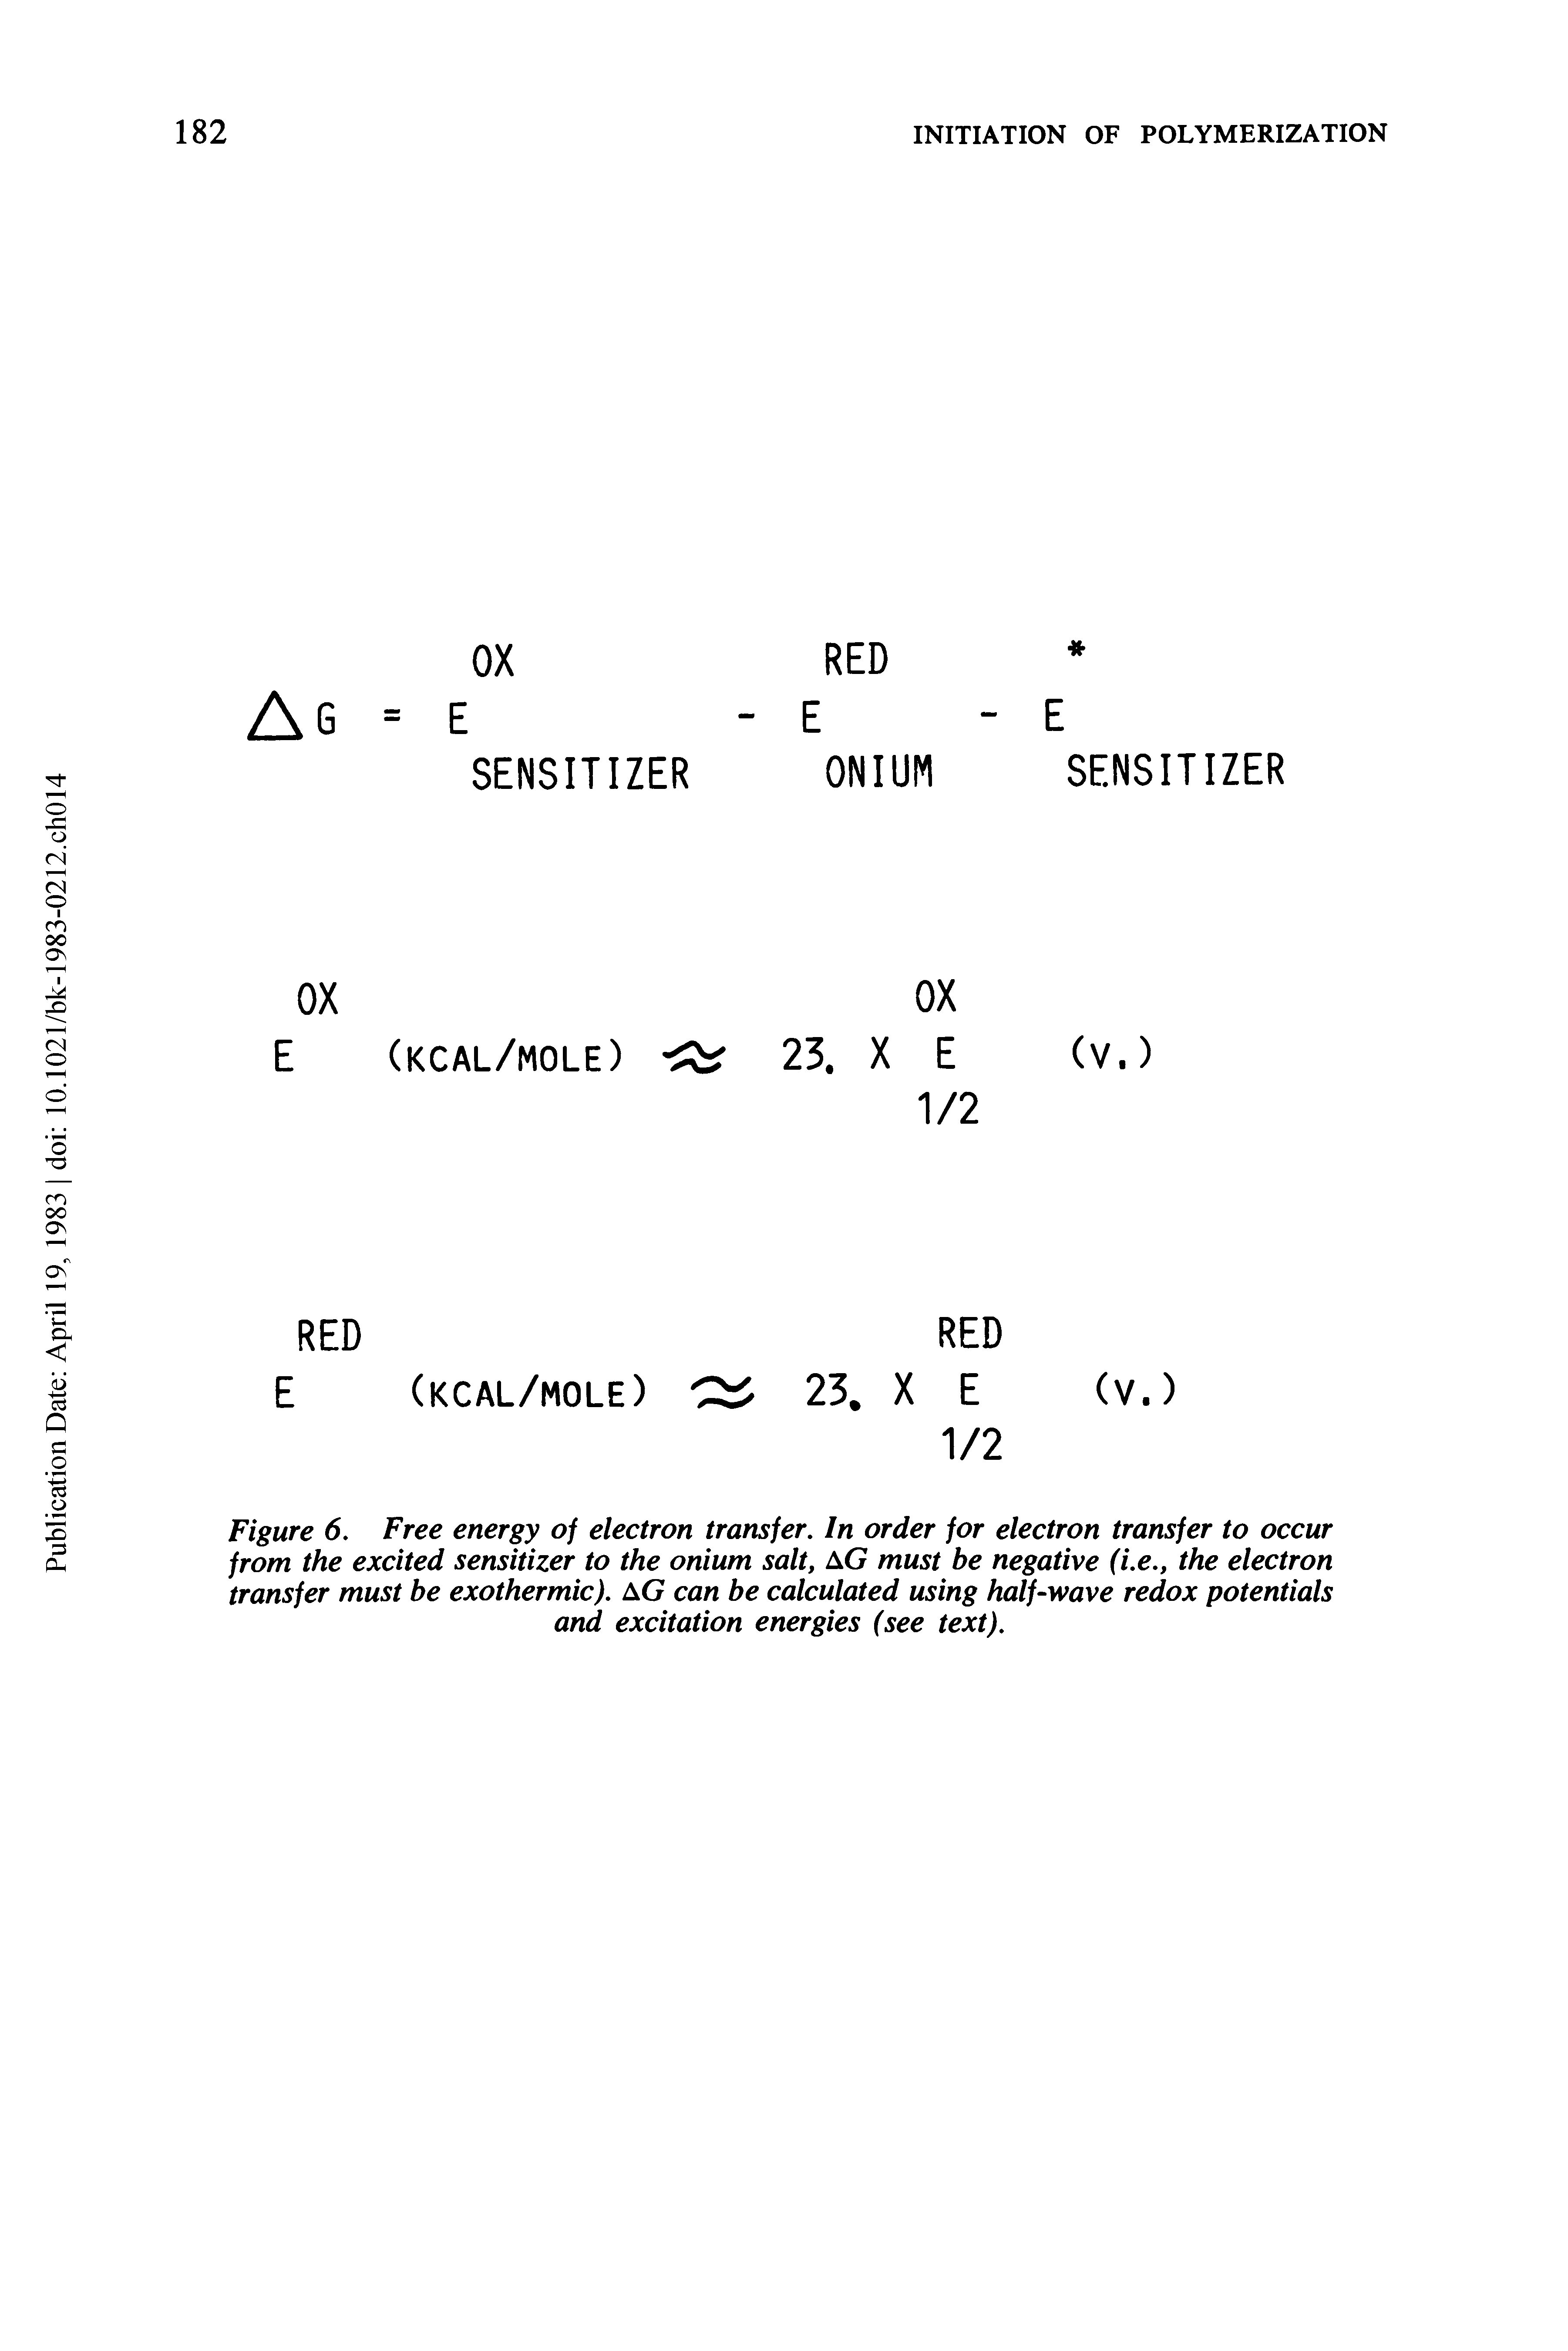 Figure 6, Free energy of electron transfer. In order for electron transfer to occur from the excited sensitizer to the onium salt, AG must be negative (i.e., the electron transfer must be exothermic). AG can be calculated using half-wave redox potentials and excitation energies (see text).